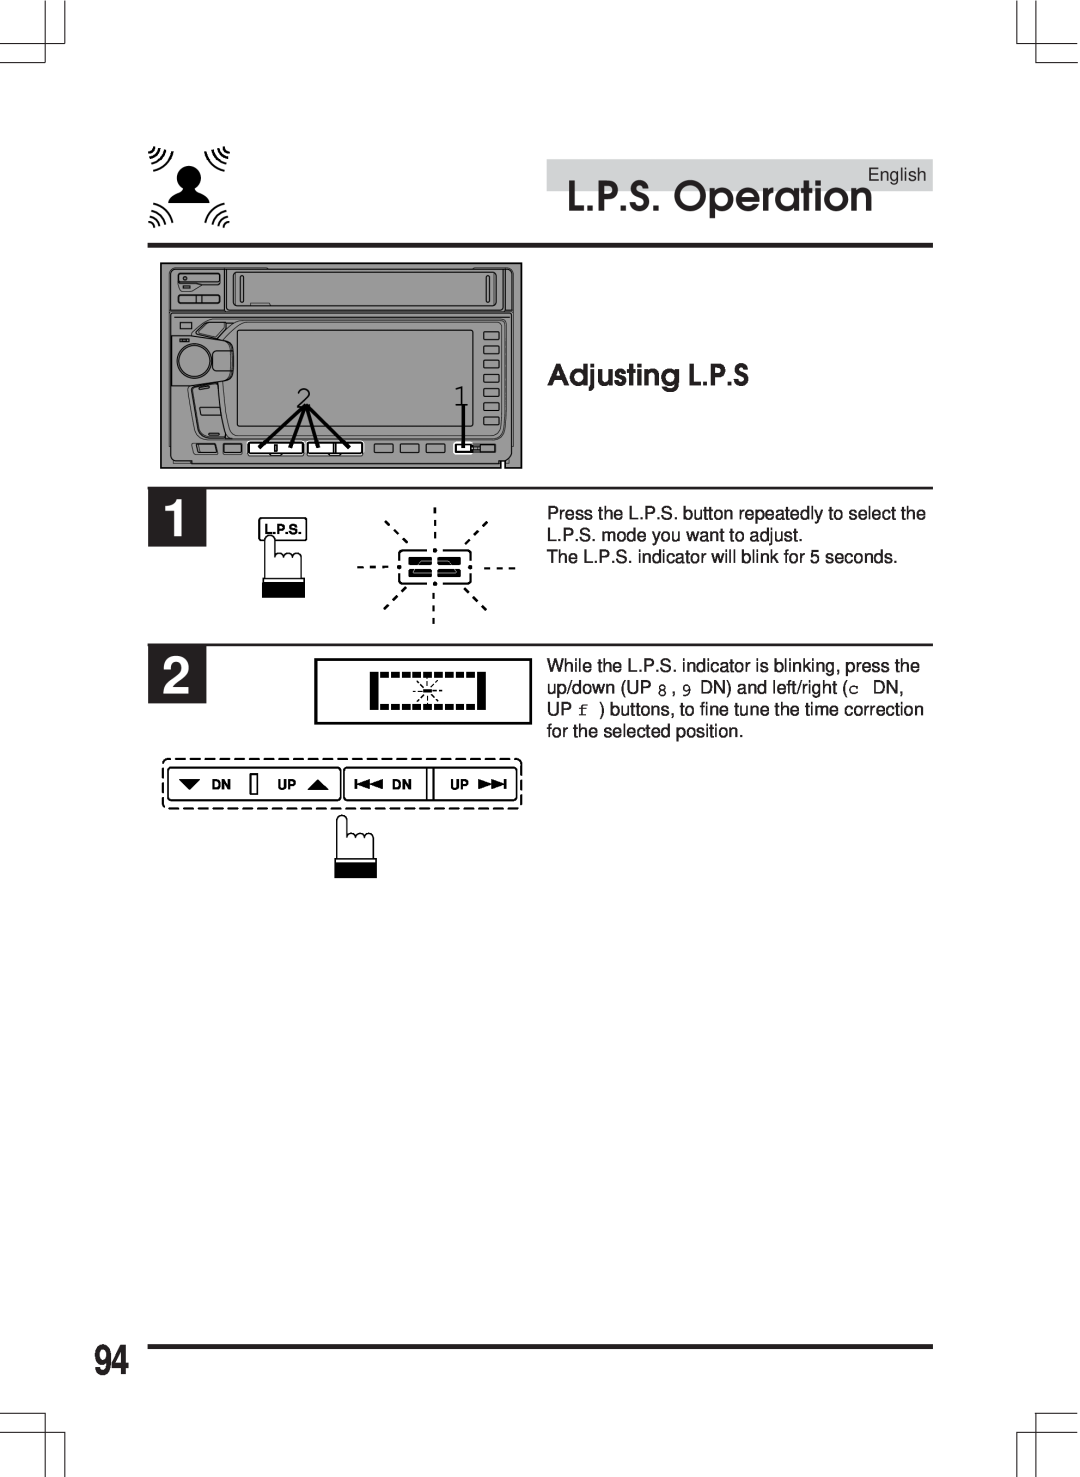 Alpine MDA-W890 Equalizer, Adjusting L.P.S, L.P.S. Operation, Press the L.P.S. button repeatedly to select the, English 